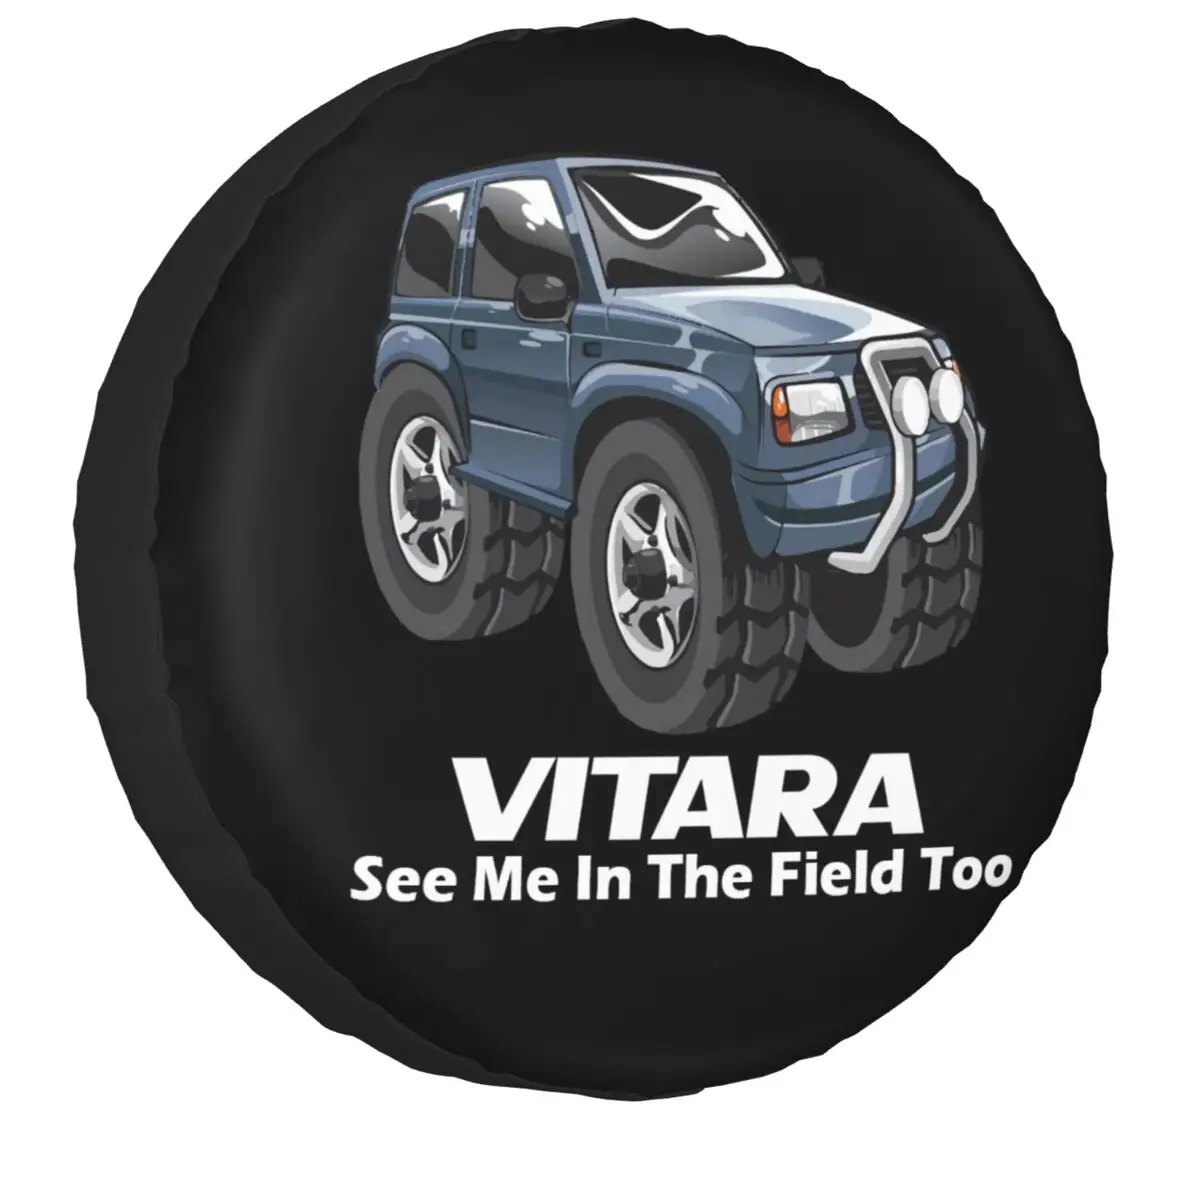 

See Me In The Field Too Spare Tire Cover Universal For Suzuki Vitara RV SUV 4x4 Car Wheel Protector Covers 14" 15" 16" 17" Inch